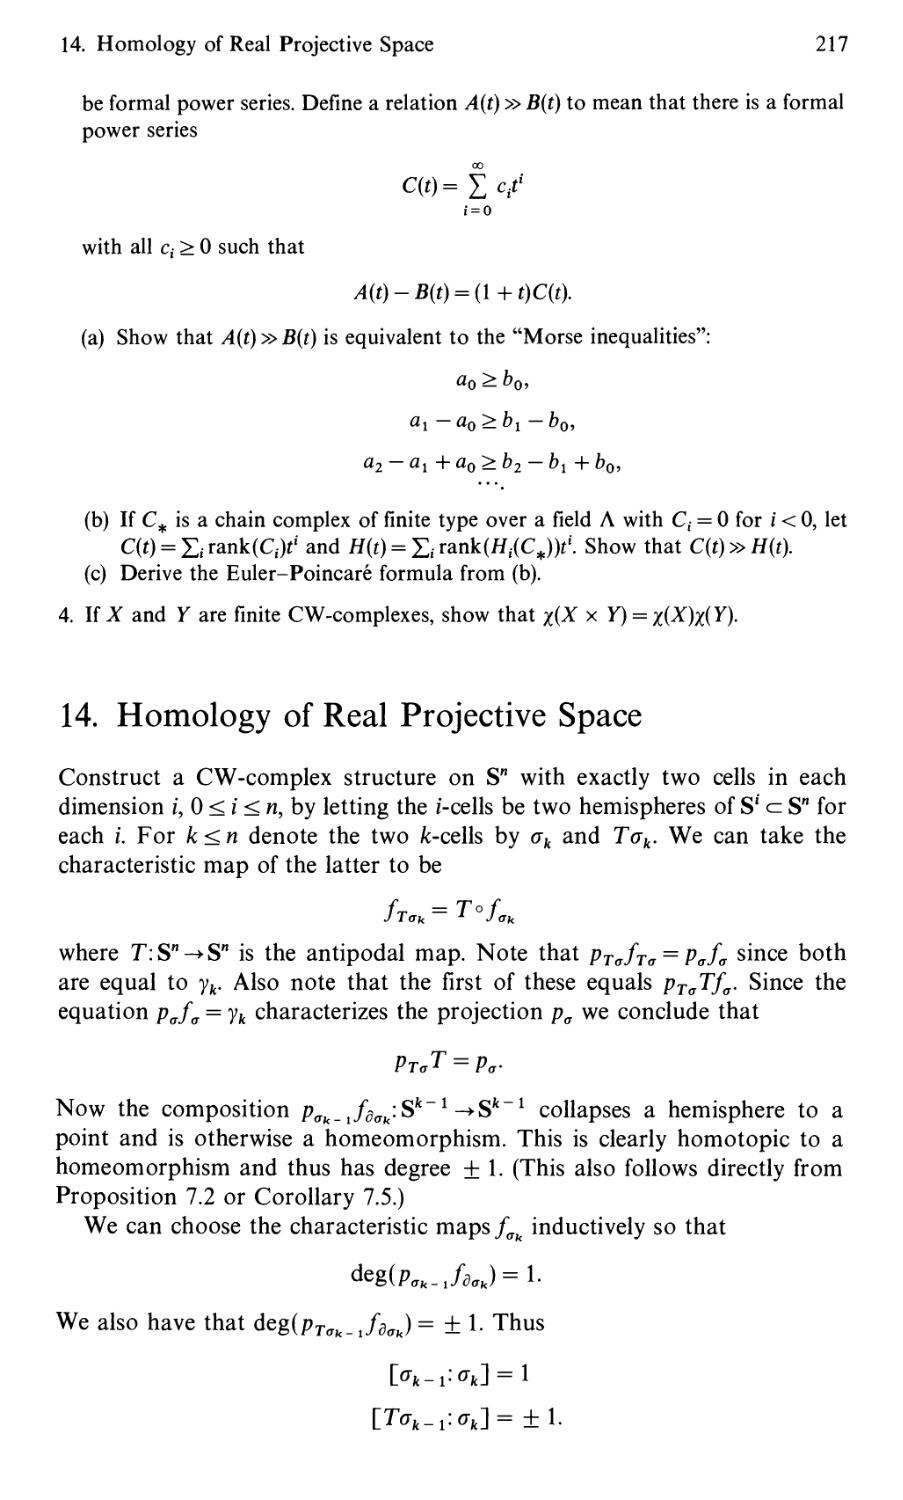 14. Homology of Real Projective Space